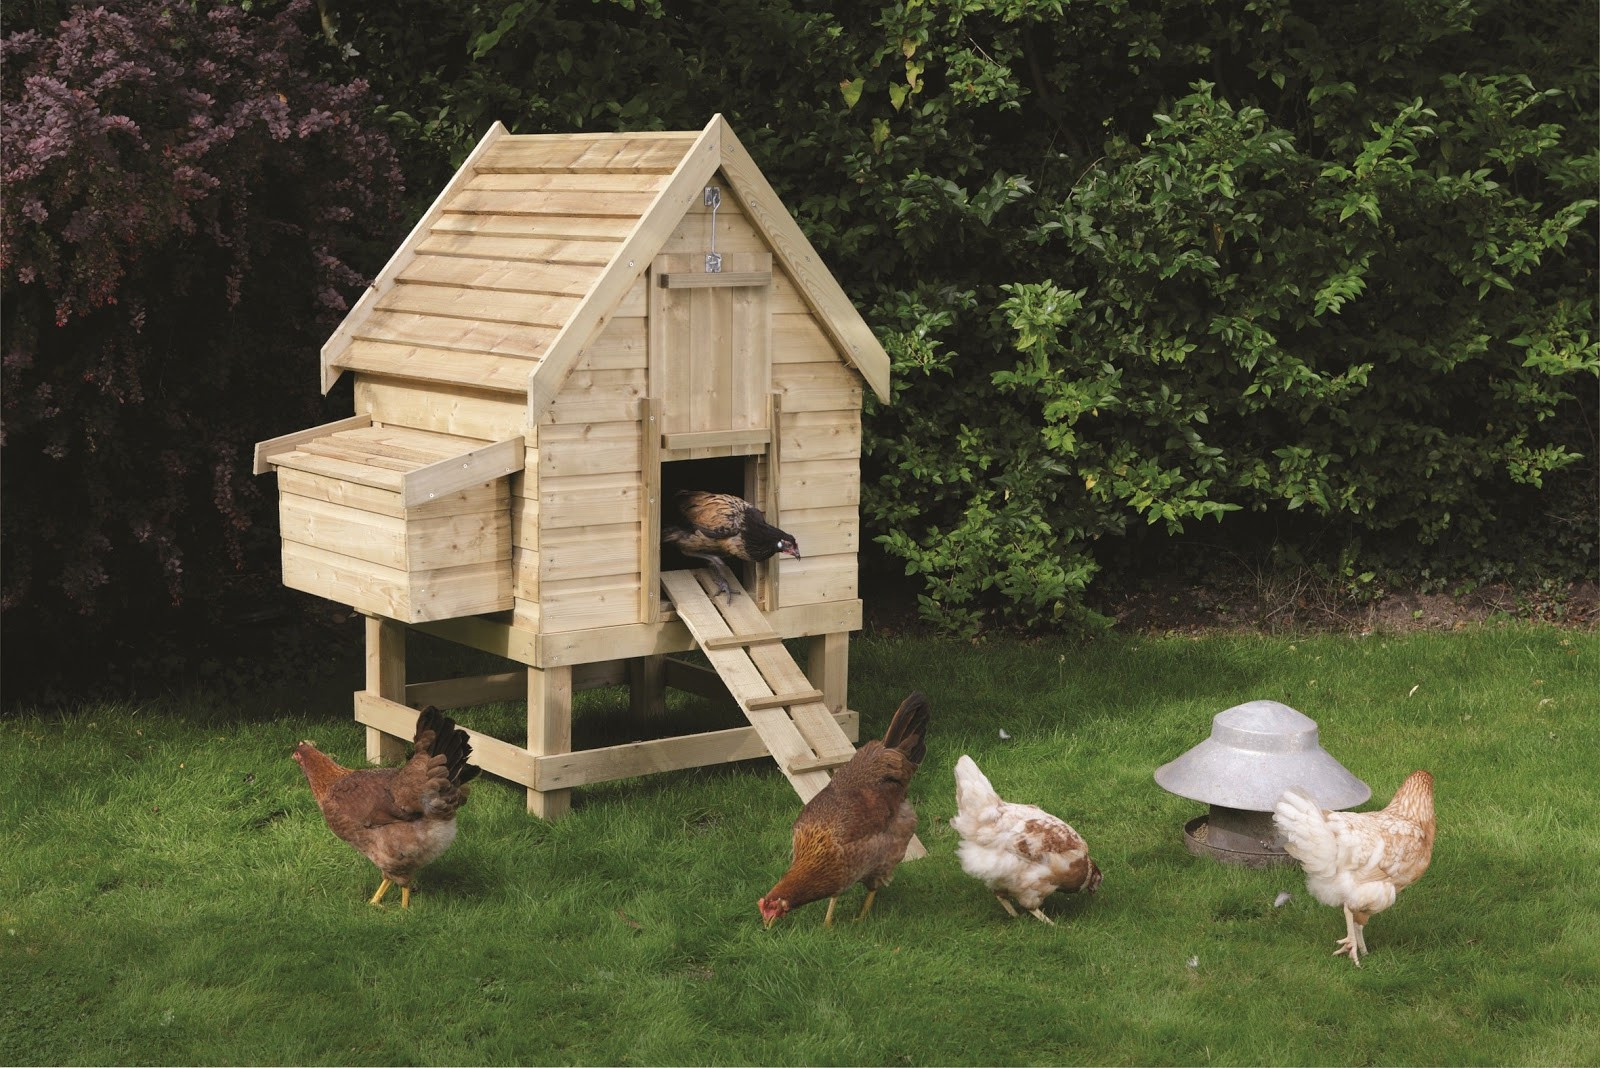 Backyard Chicken Coop Designs
 How To Build A Chicken Coop Chicken Coops Designs Top